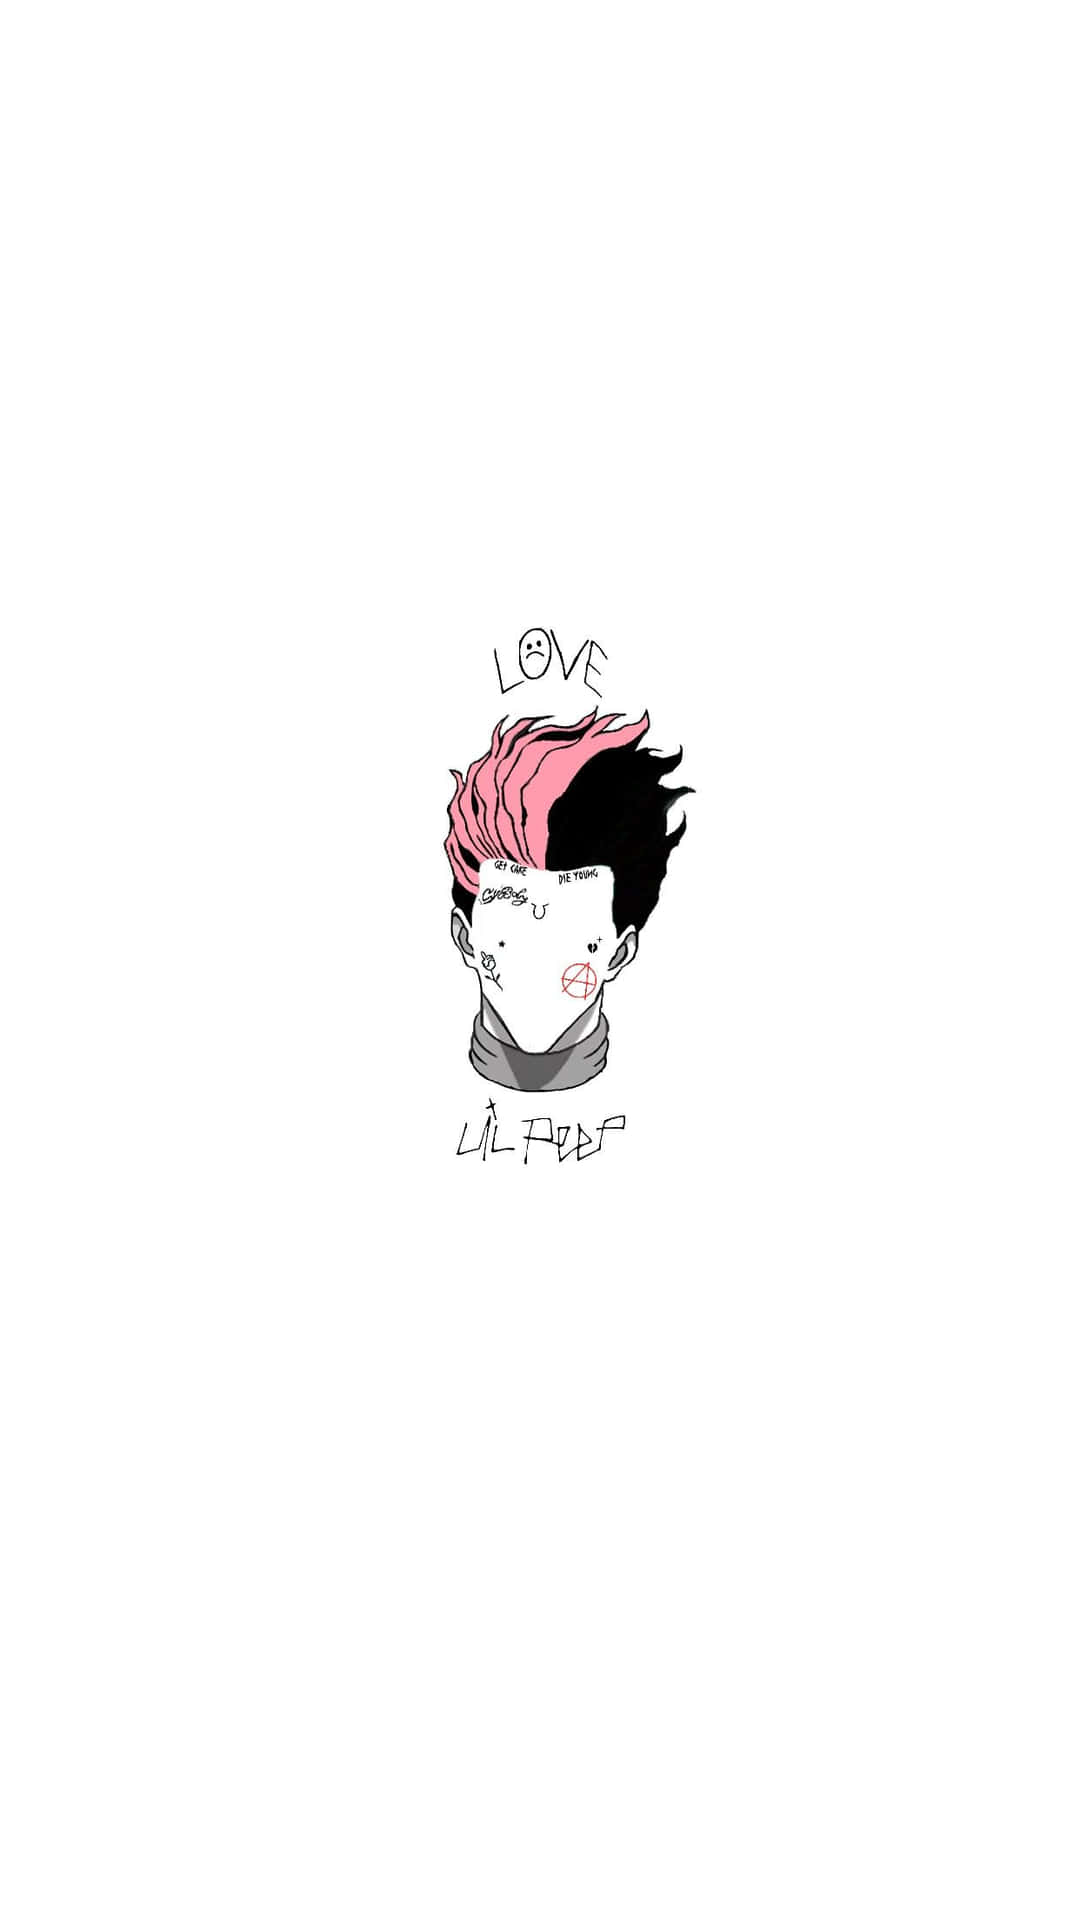 Join the Hisoka party and own an iphone for all your needs. Wallpaper